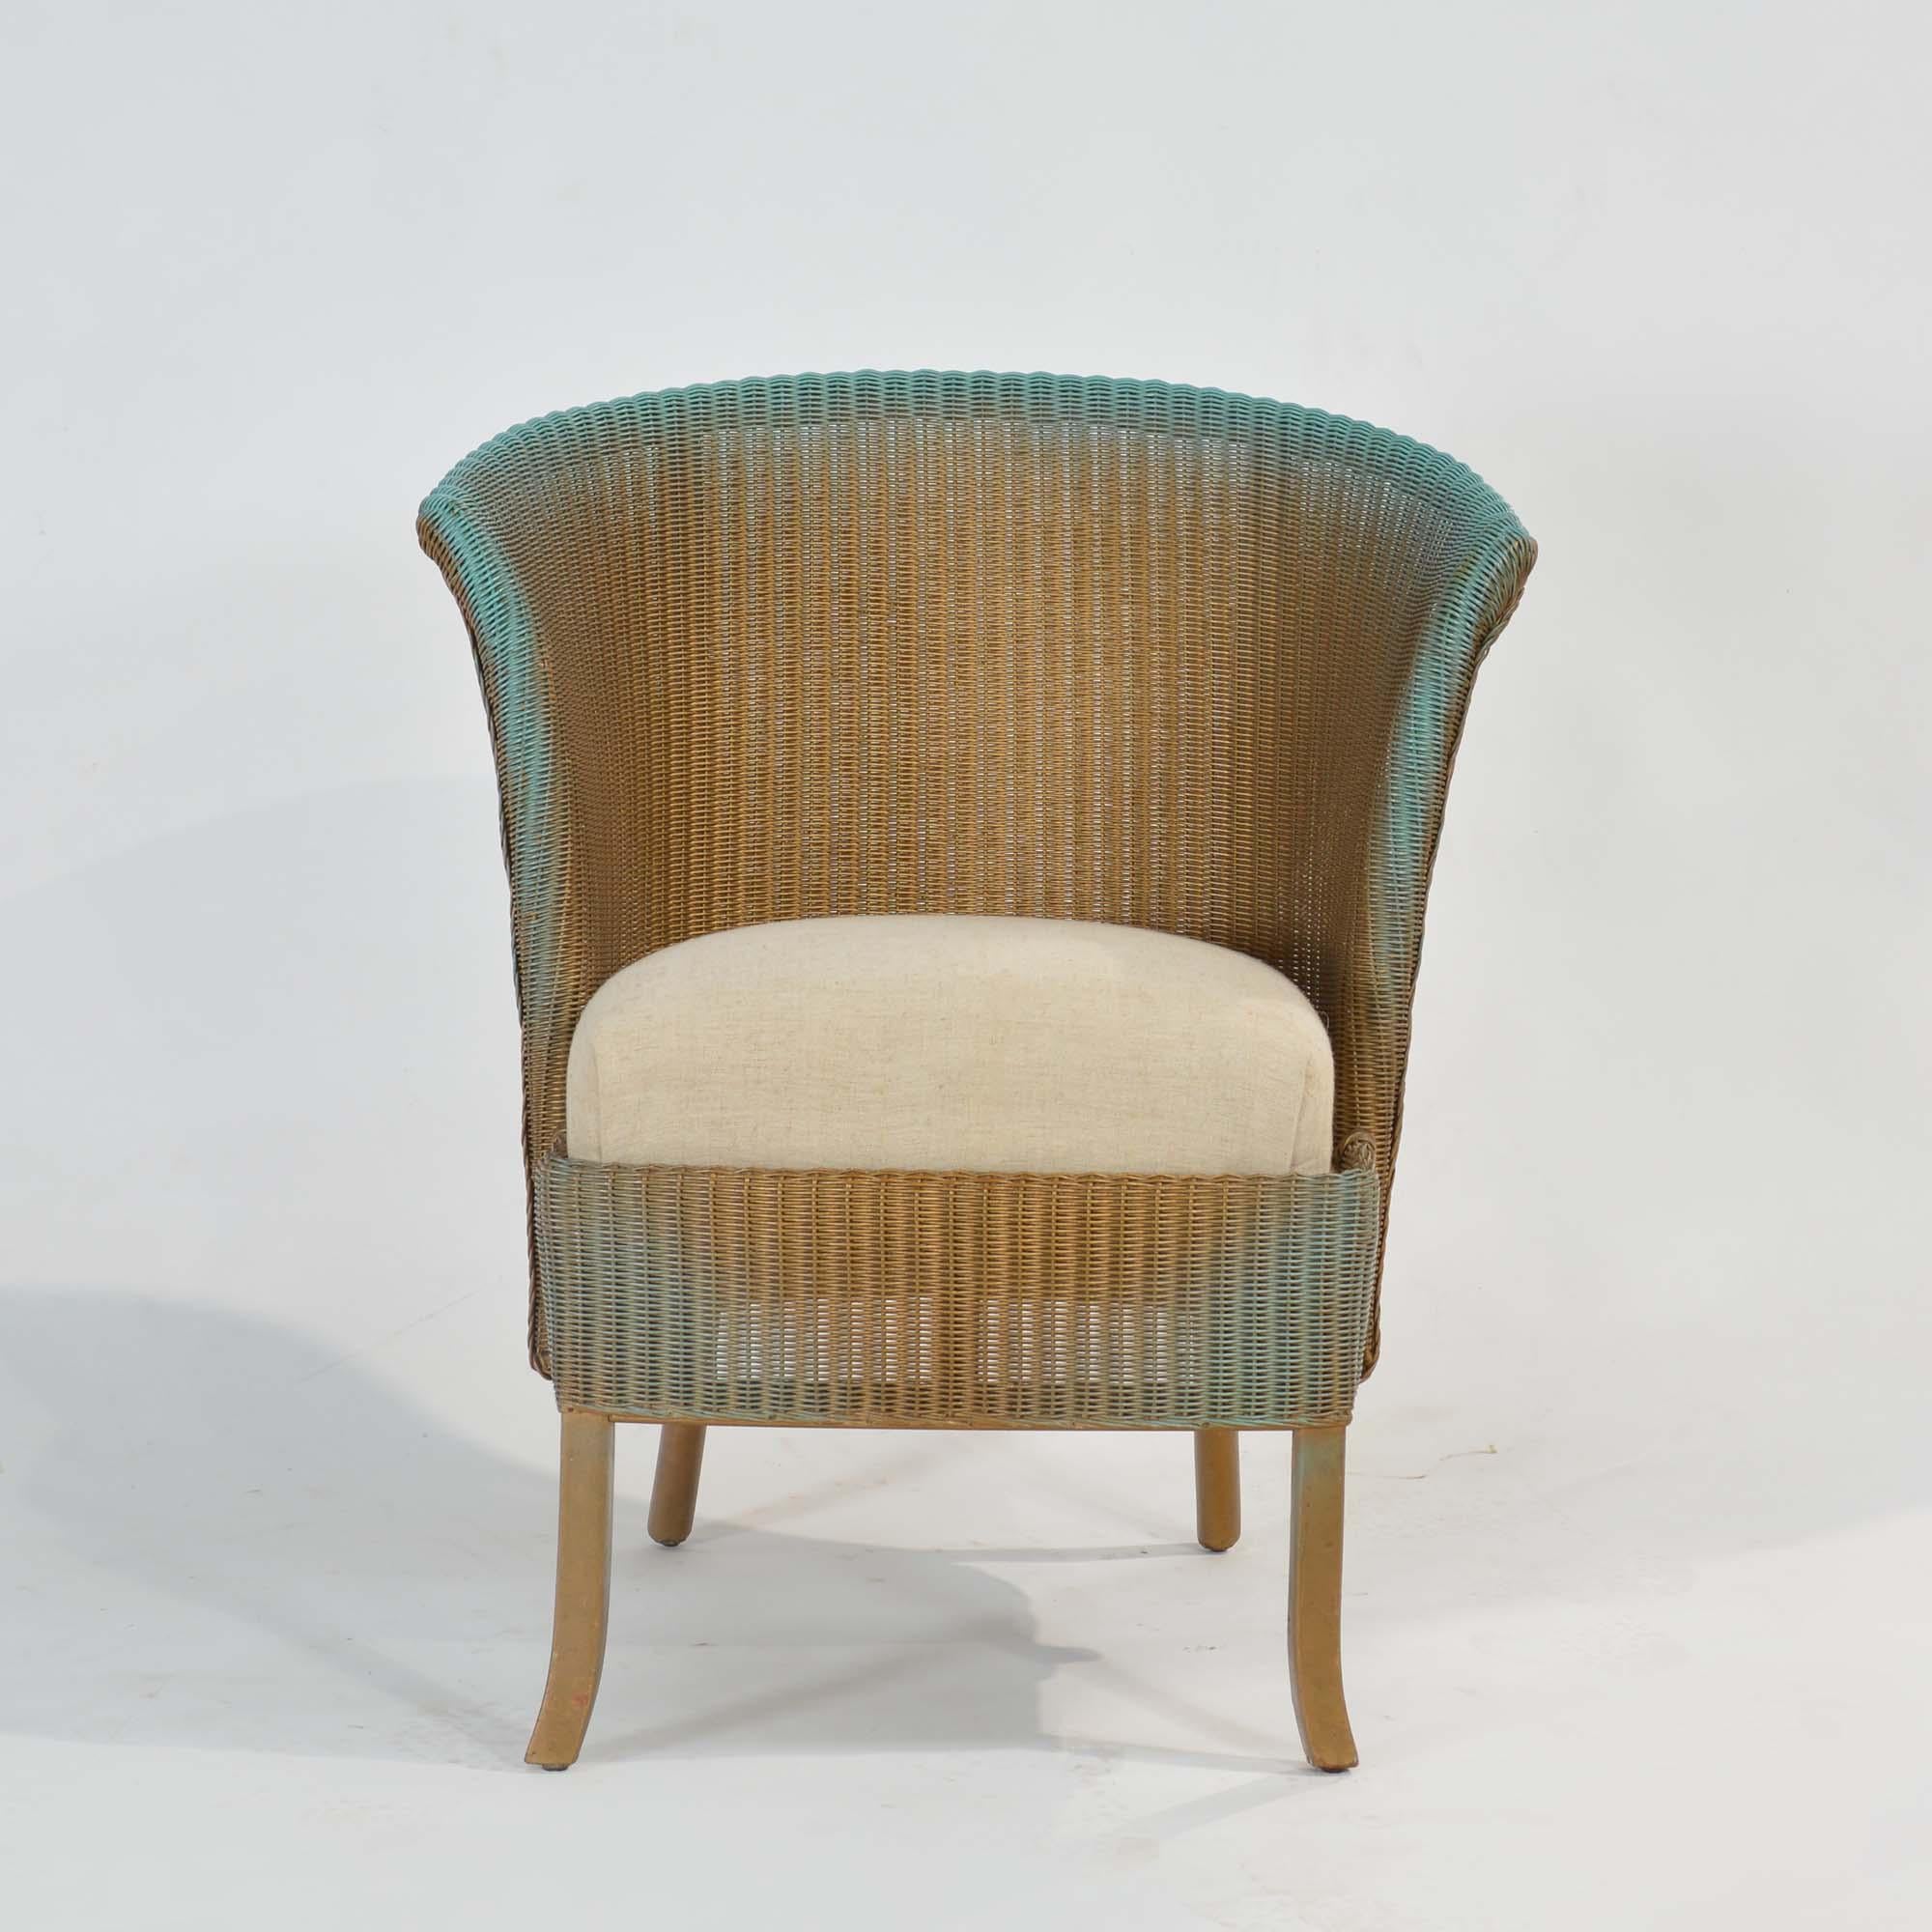 Lloyd Loom Lusty chair
The Lloyd loom or weave is made from craft paper woven onto wire.  With sprung seat newly upholstered in undyed cotton, original gold/turquoise paint in very good order.
English, mid 20th century